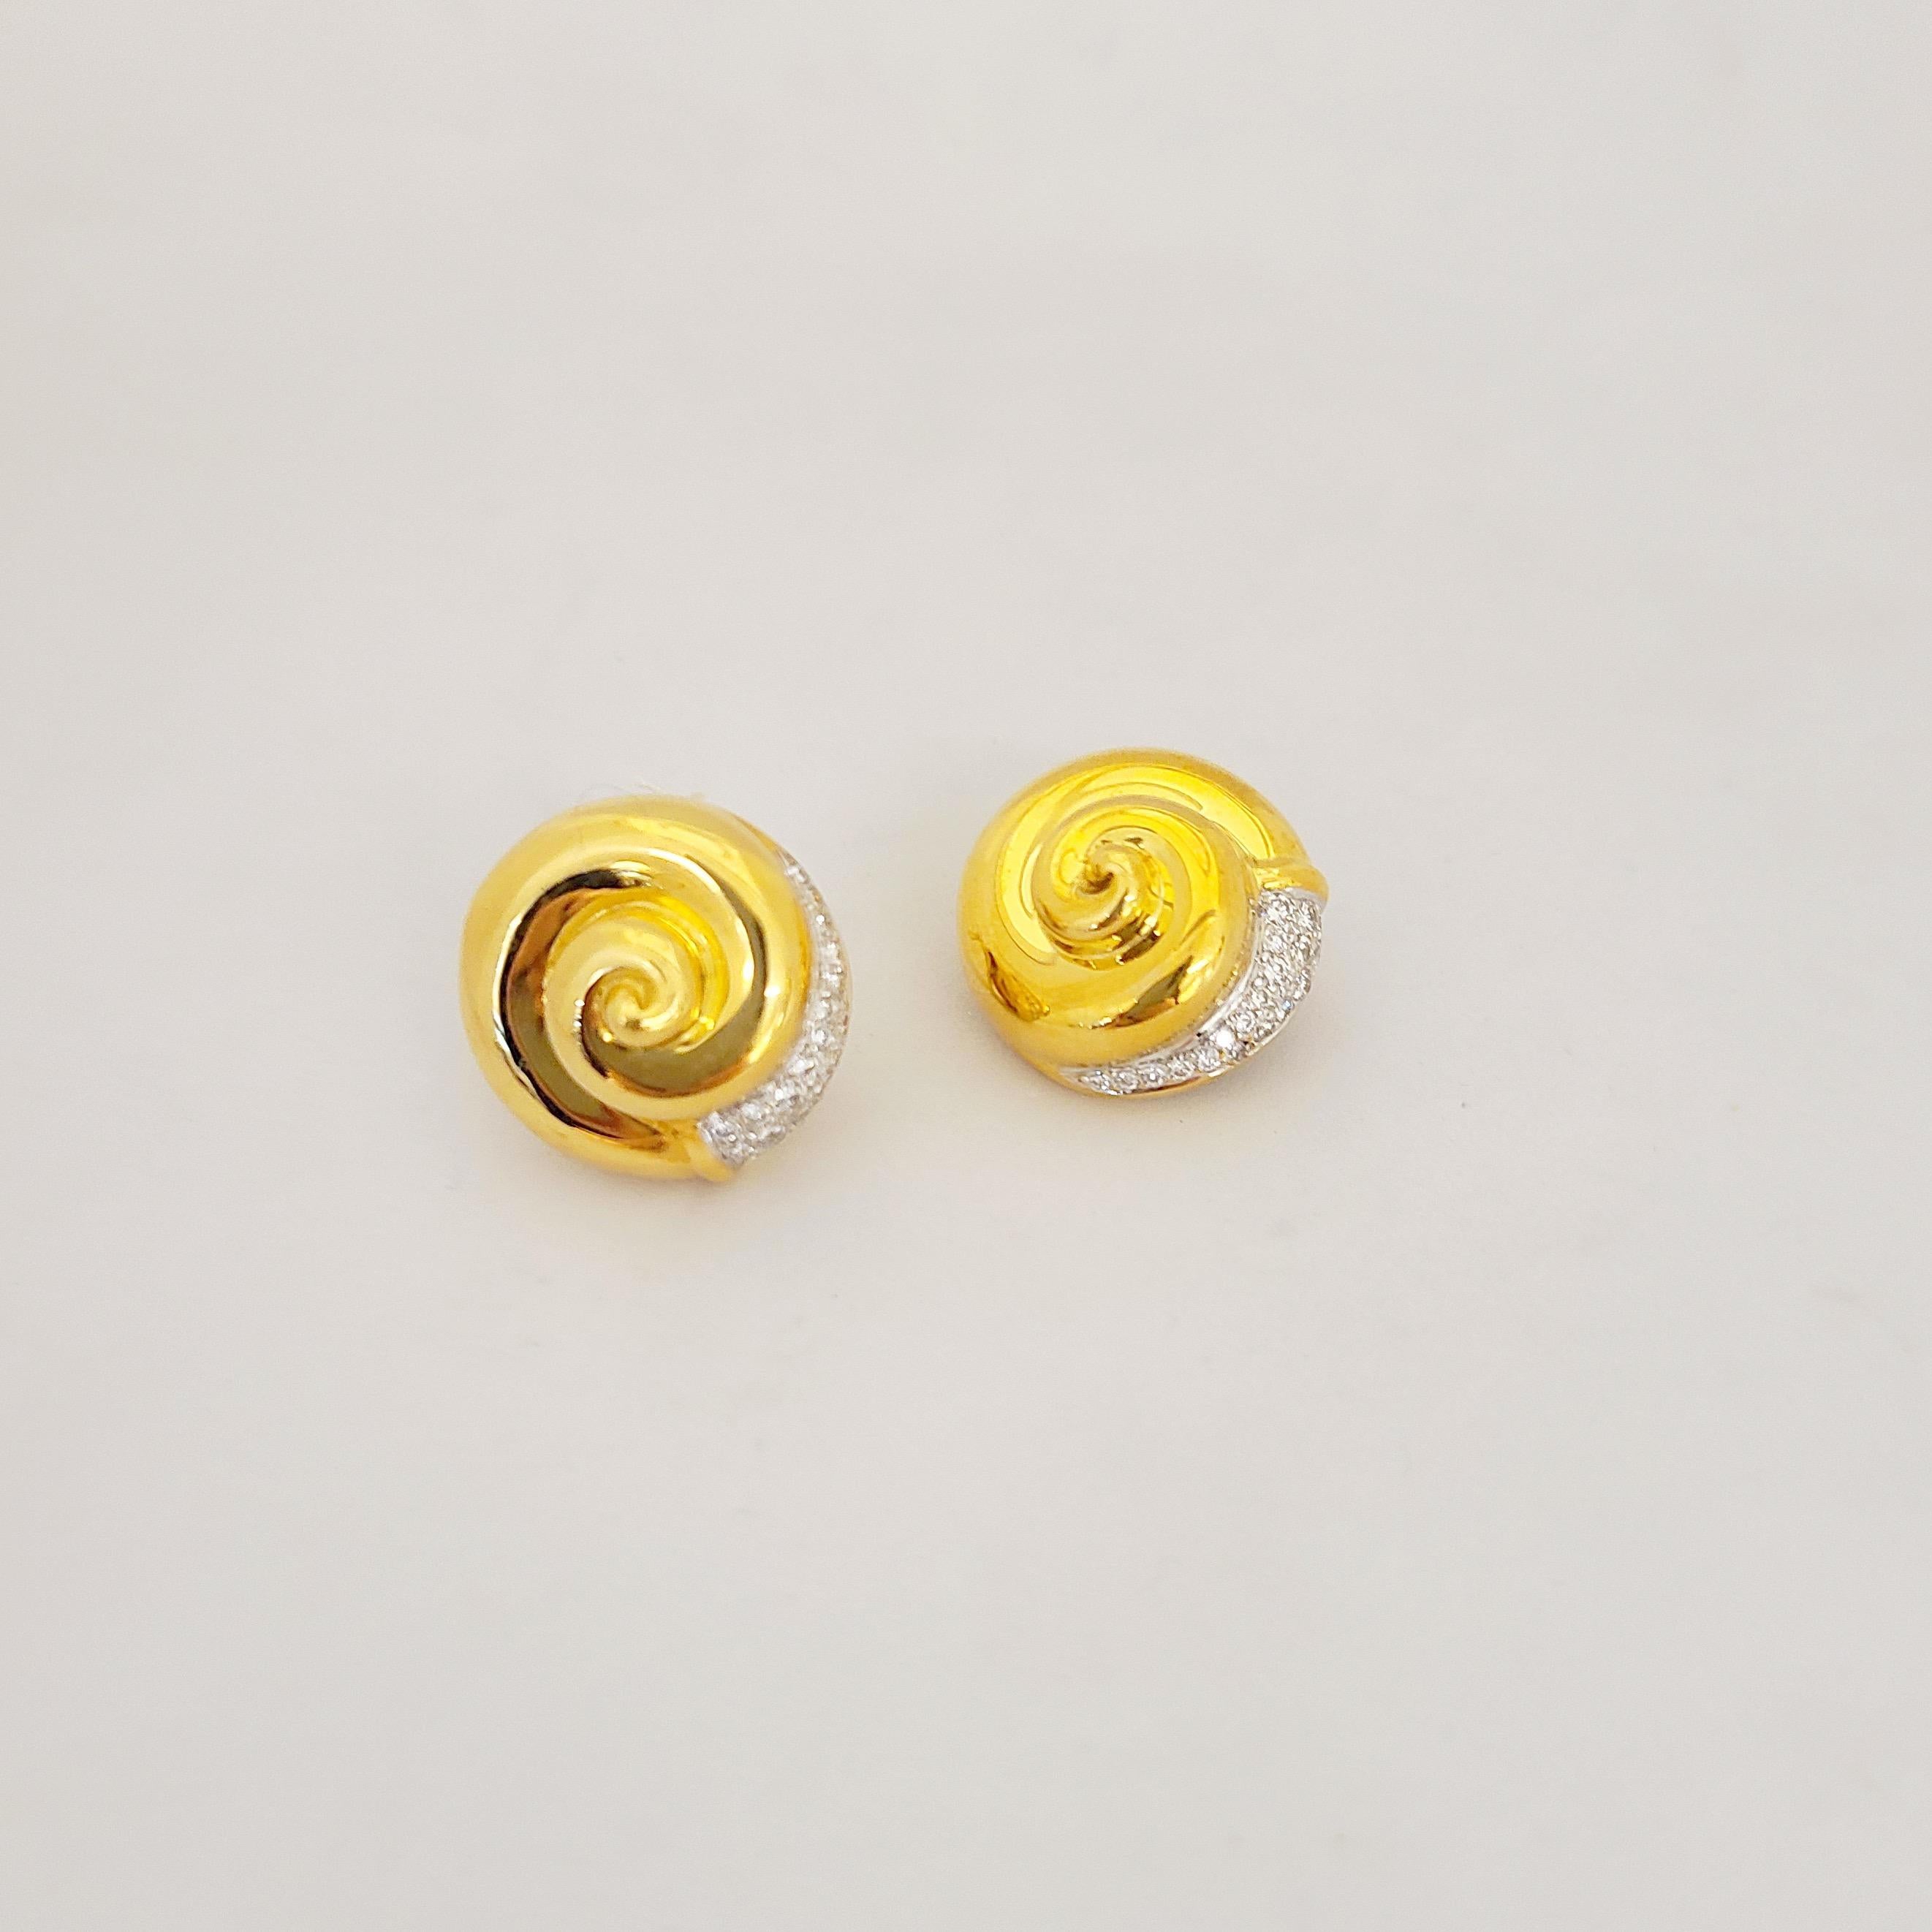 Round Cut 18 Karat Yellow Gold and Diamonds 0.65 Carat Swirl Button Earrings For Sale